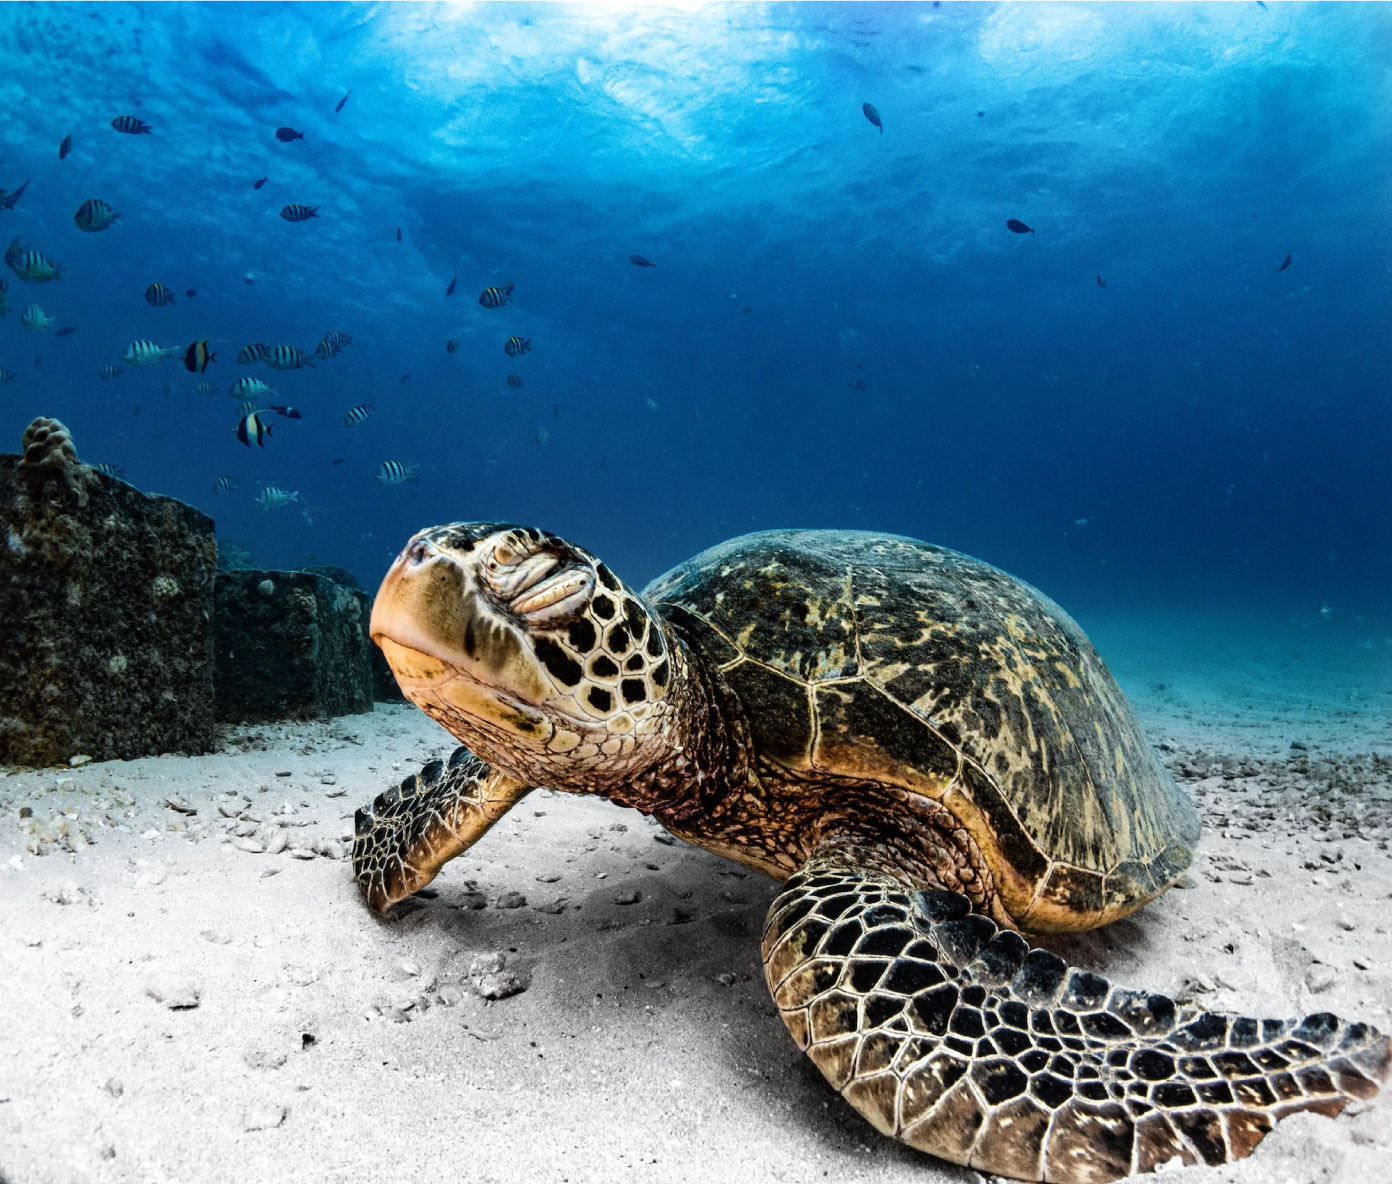 Totally Chilled Sea Turtle Photo by Christopher Byler. Sony Alpha 7R III. Sony 16-35mm f/4. 1/125-sec., f/8, ISO 100